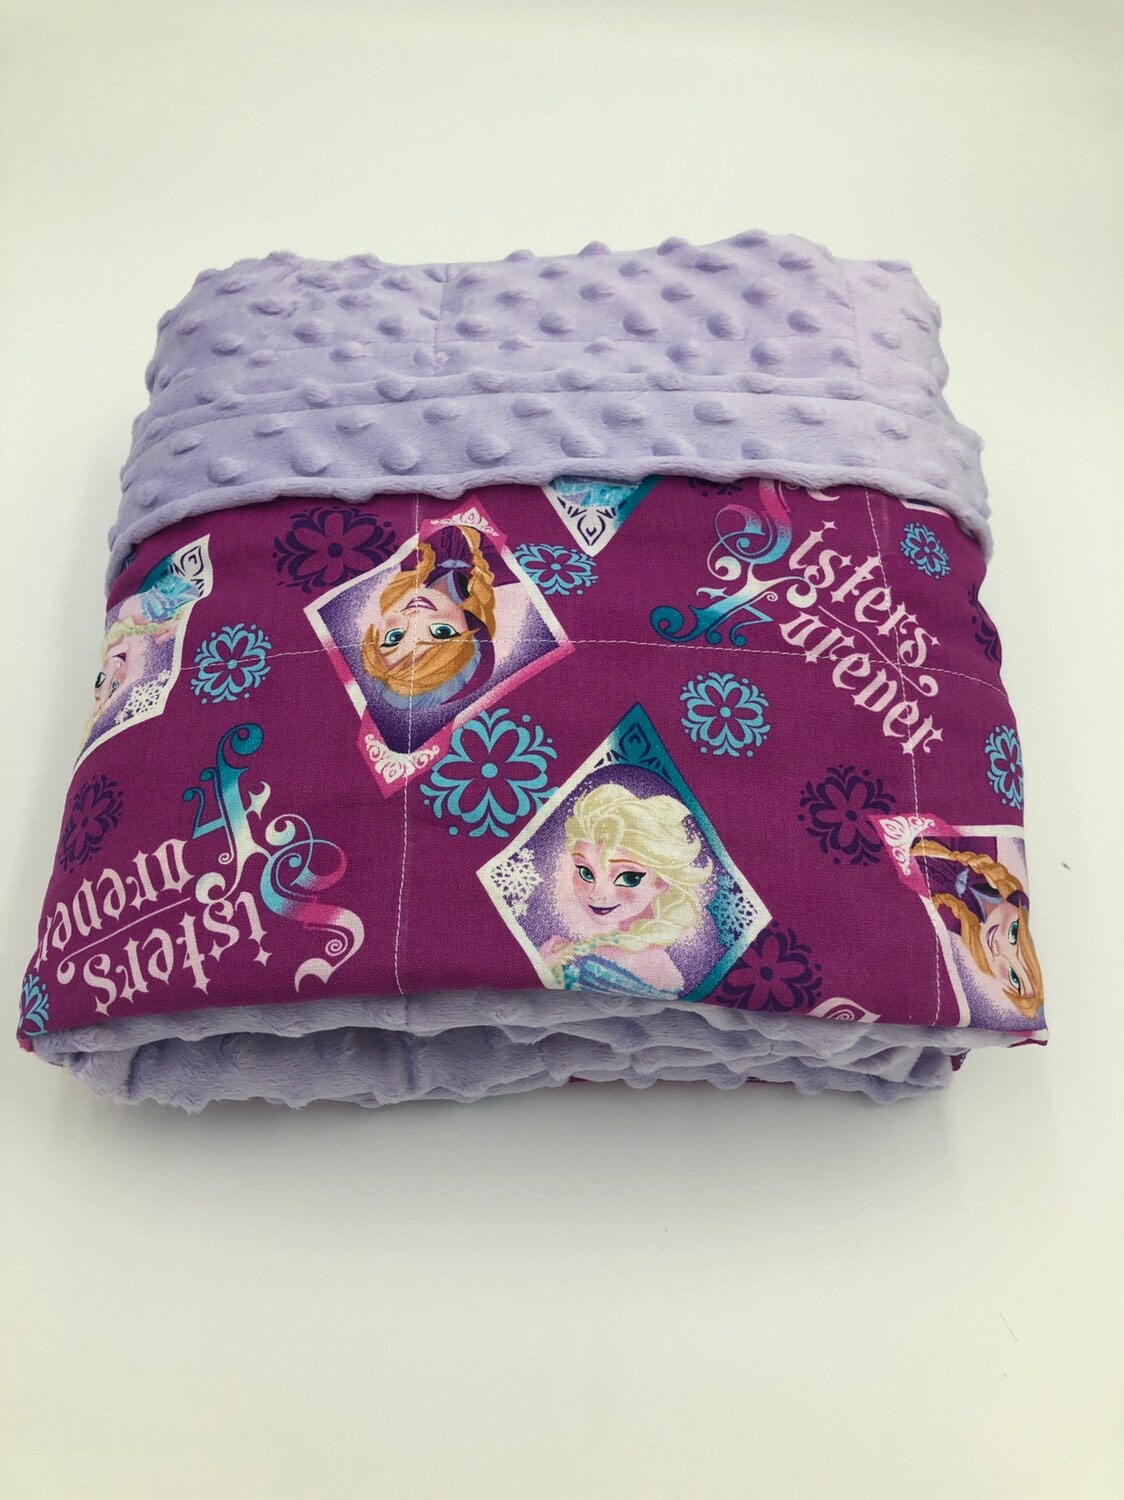 5.5pound Frozen Weighted blanket, 42x48inches 5.5pounds, Elsa Weighted